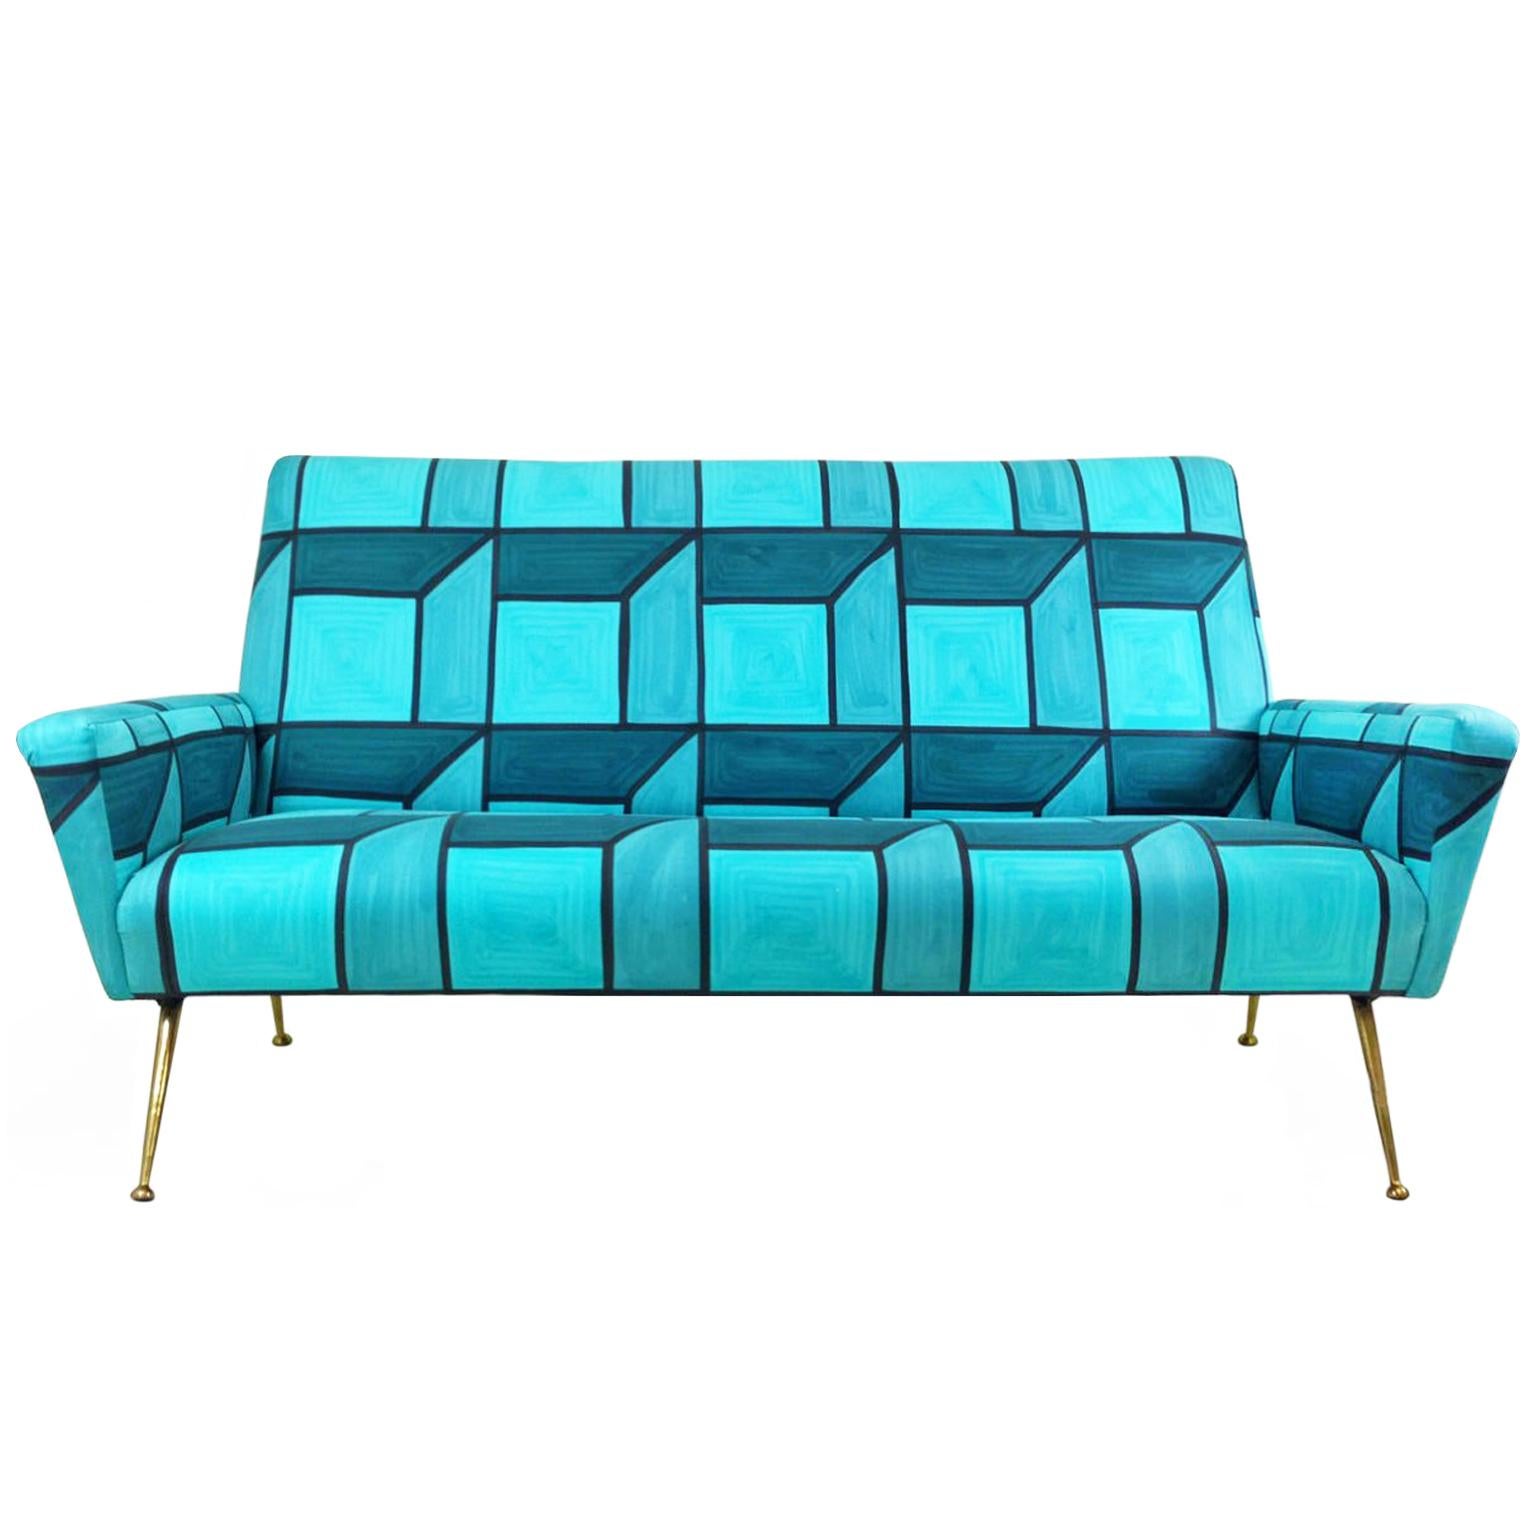 Mid-Century Italian brass leg sofa in the style of Gio Ponti, upholstered in hand-painted blue cube fabric by Livio de Simone, Italy, 1950s-2015.